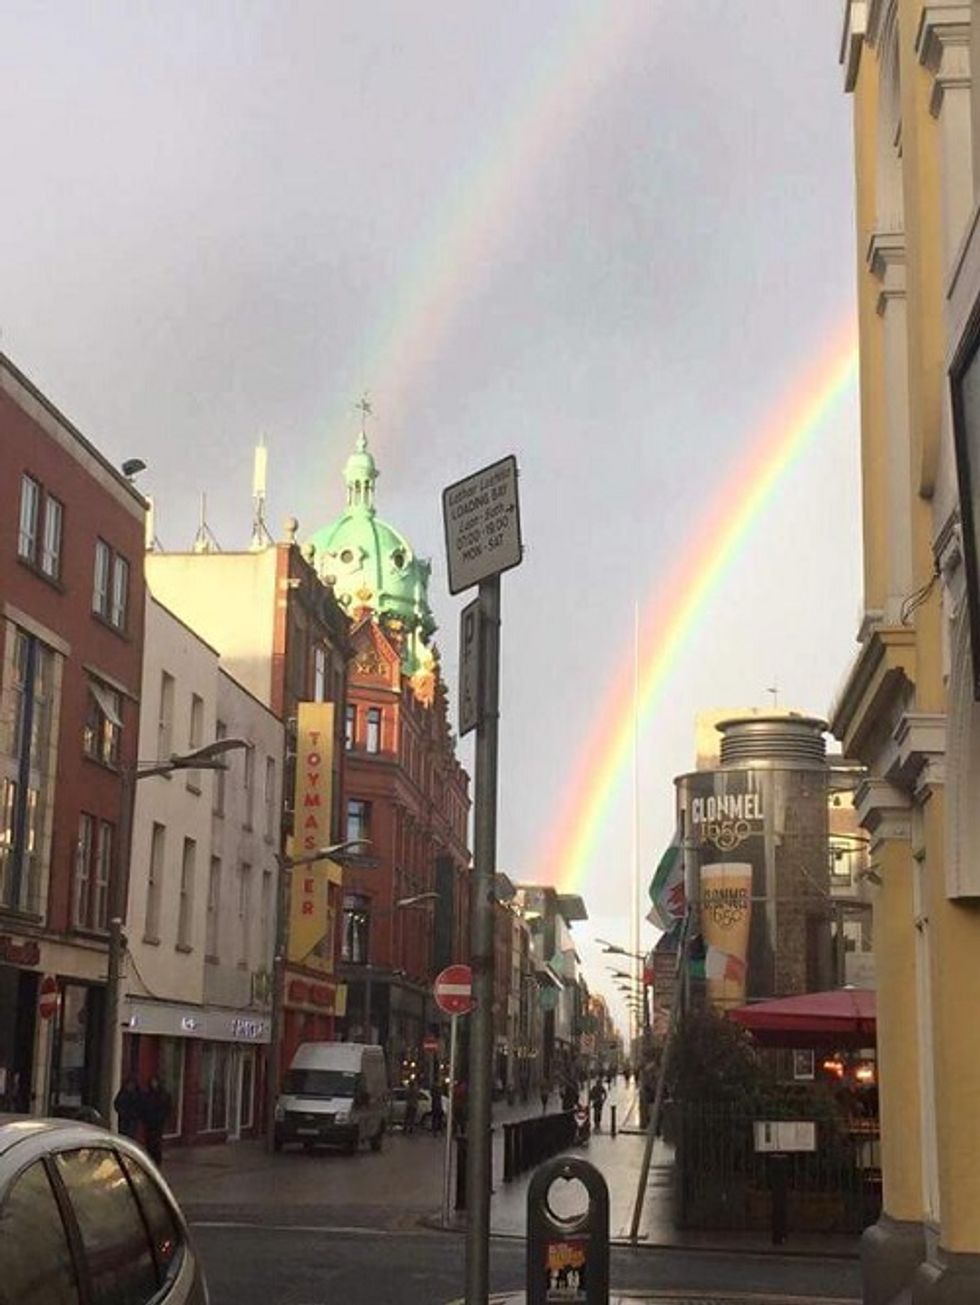 Ireland Throatcrams Itself With Marriage Equality, Shoots Gay Rainbows All Over Dublin